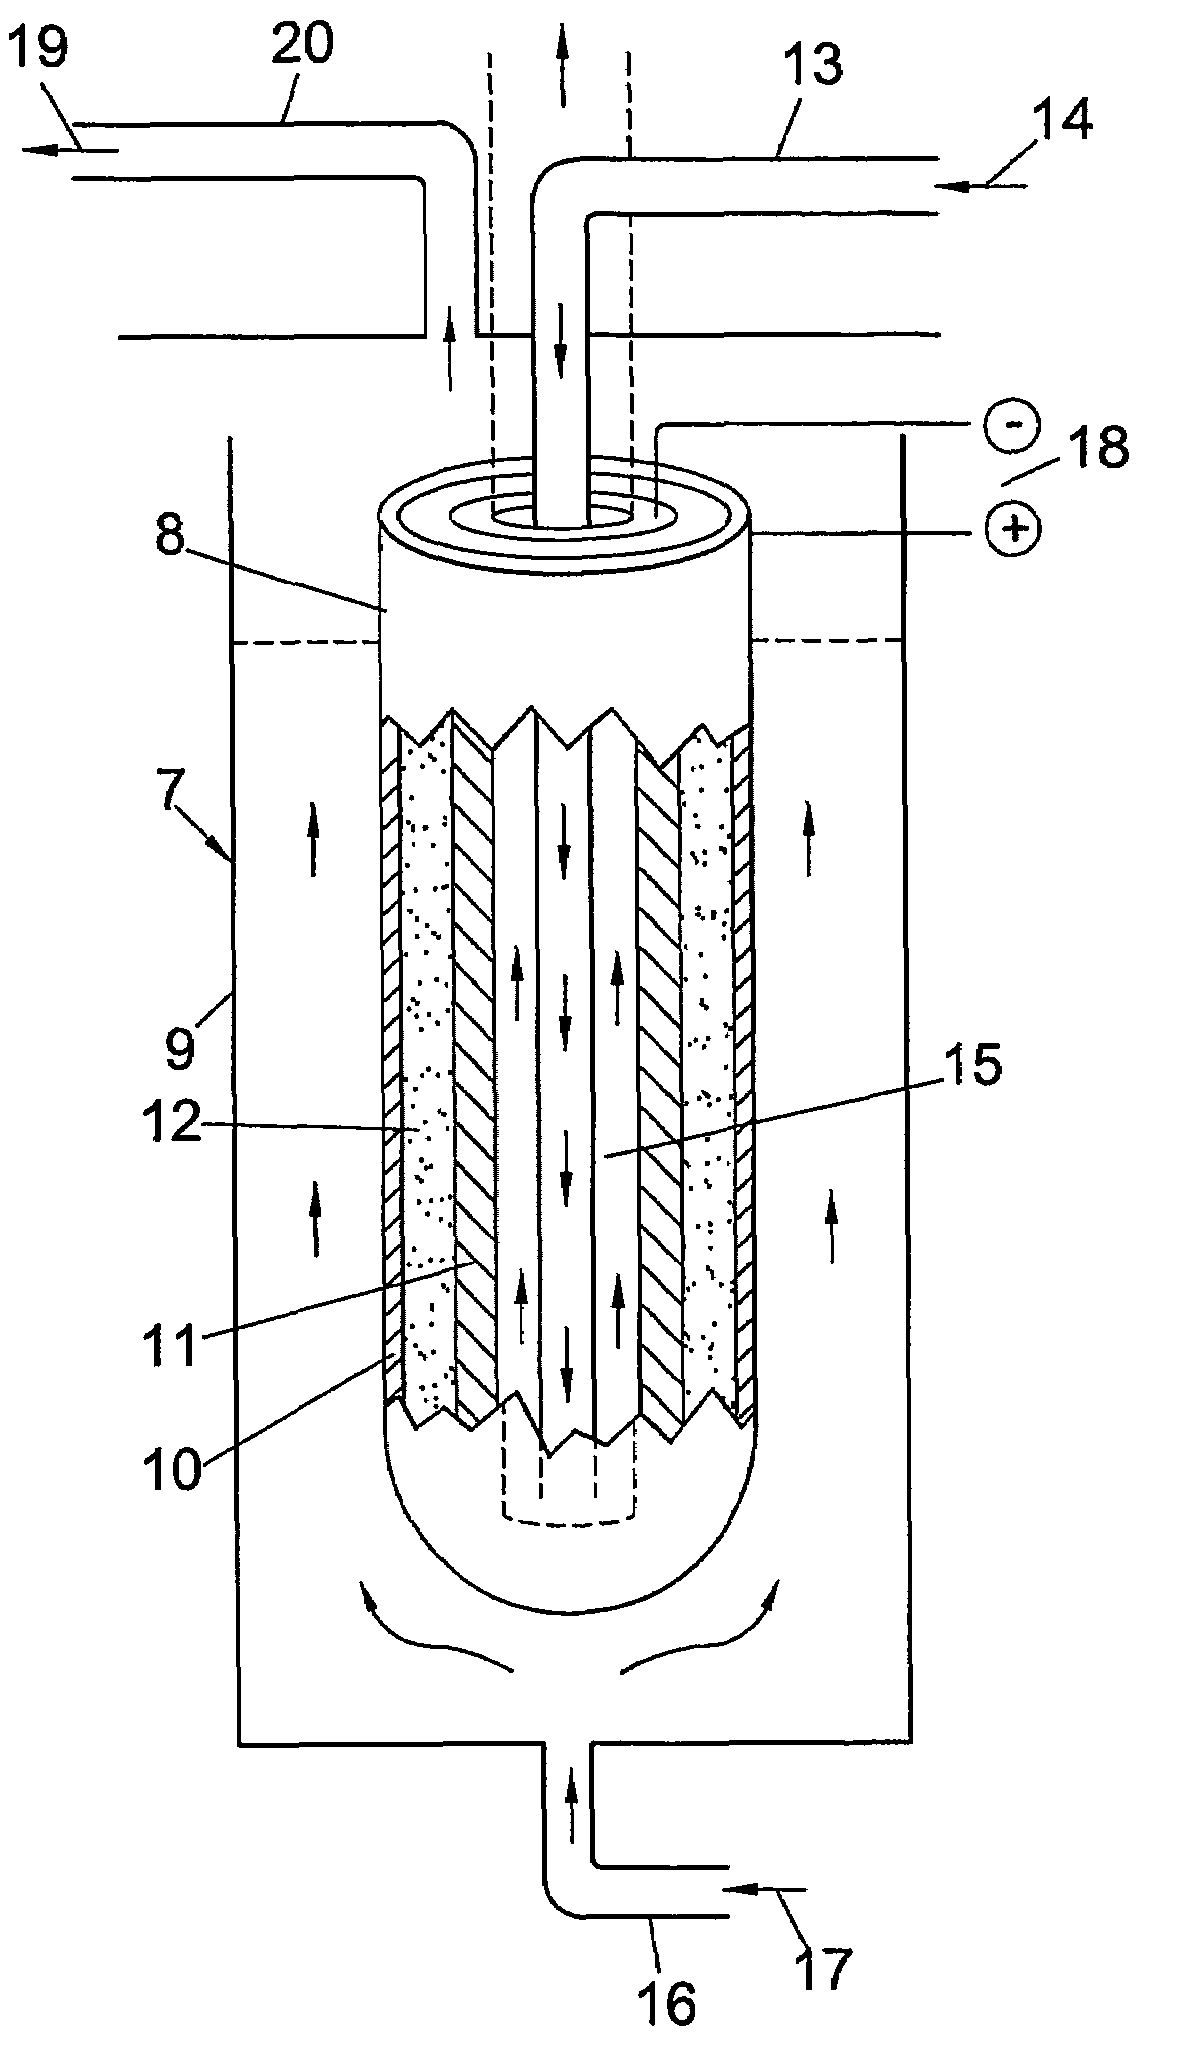 Perovskite-based fuel cell electrode and membrane